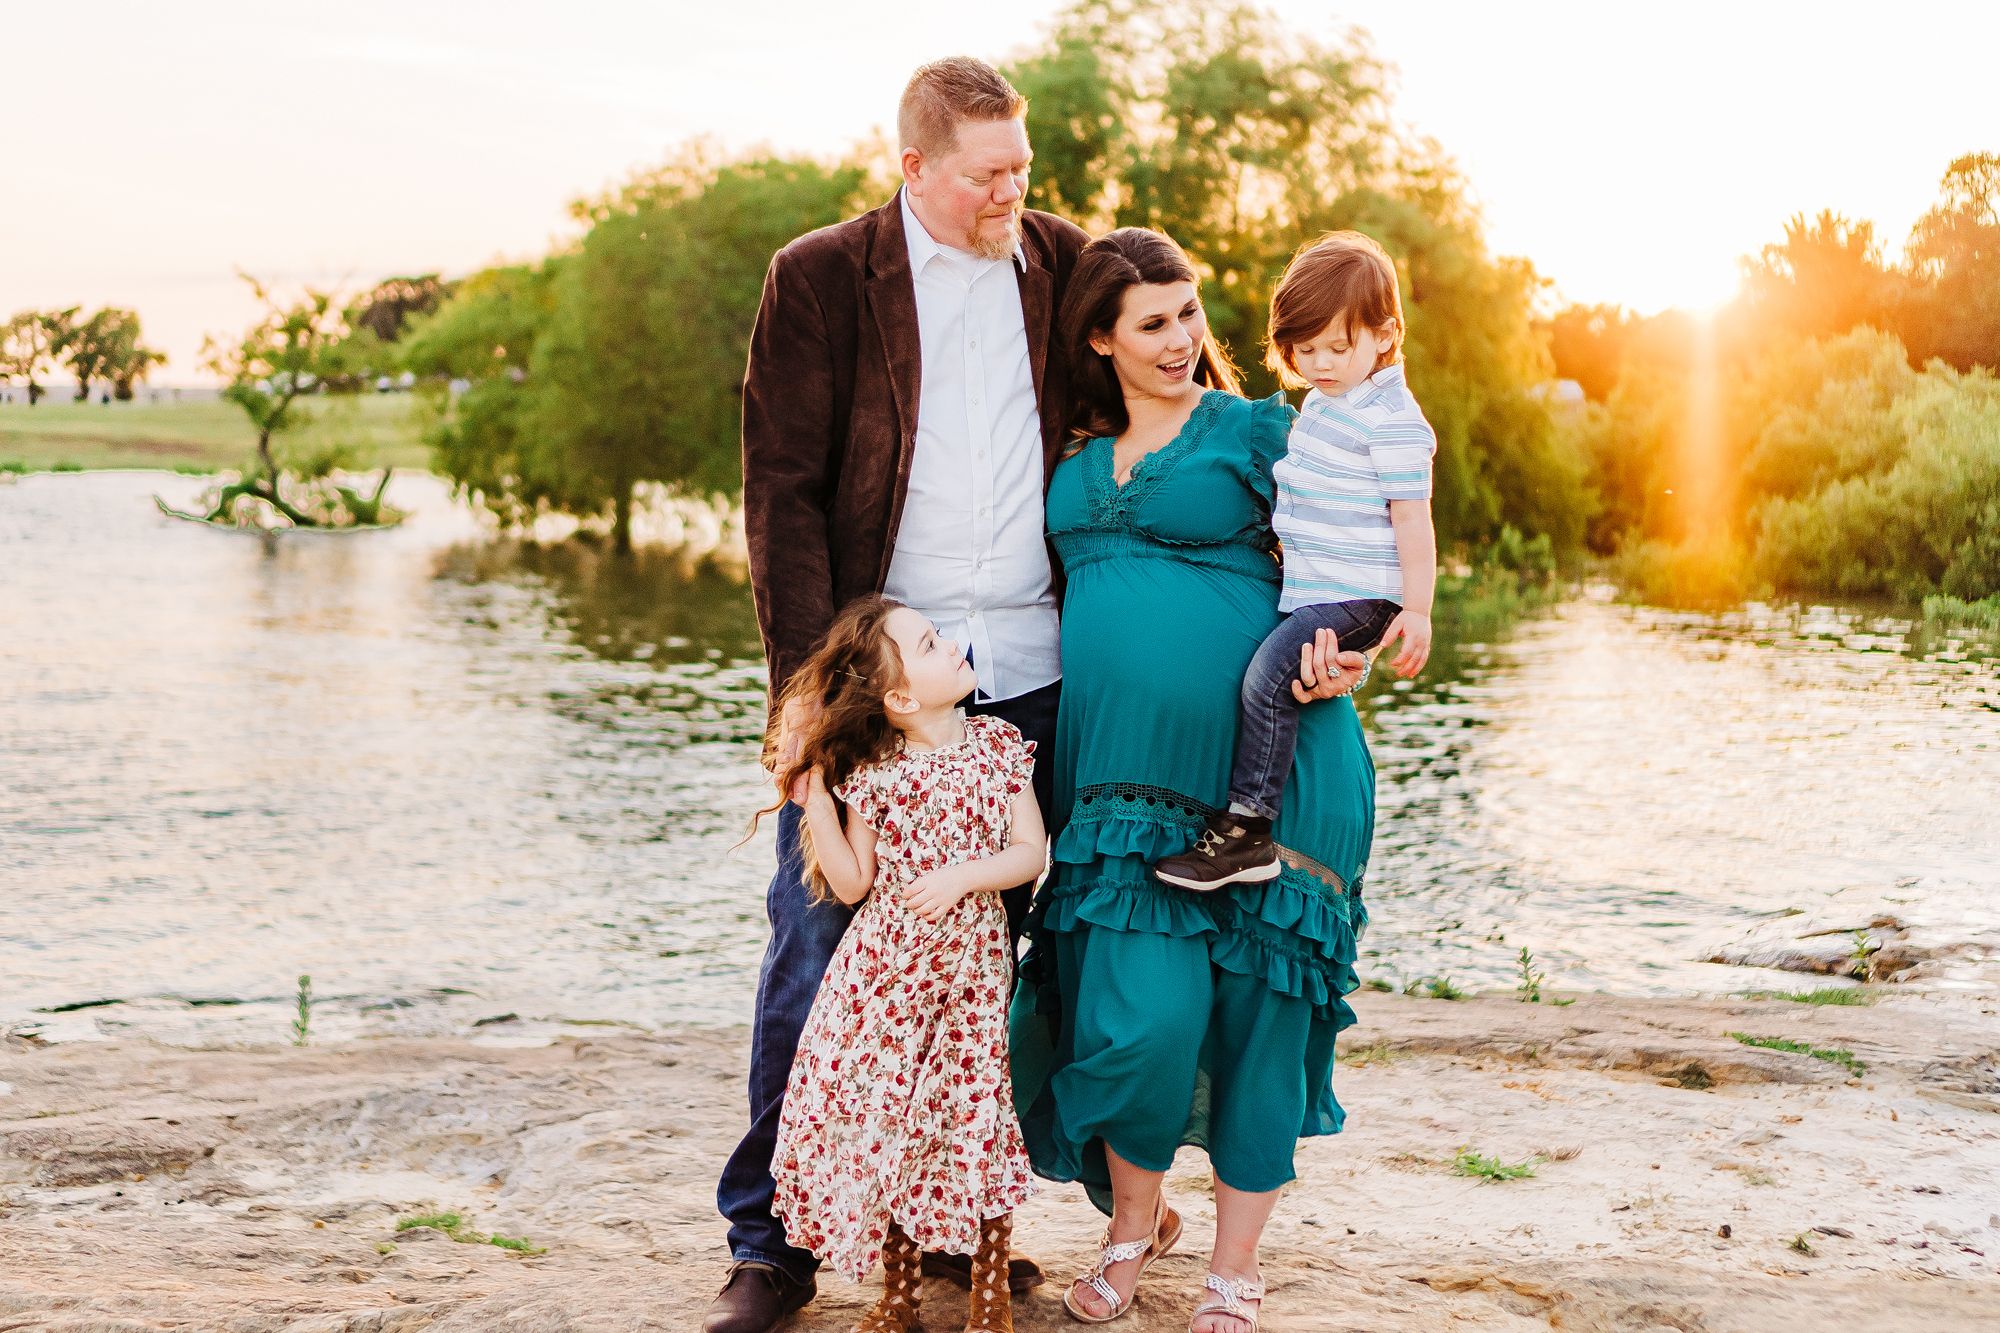 What to wear for your maternity session | Family Maternity Session | Dallas, Texas Photographer | via brittnierenee.com